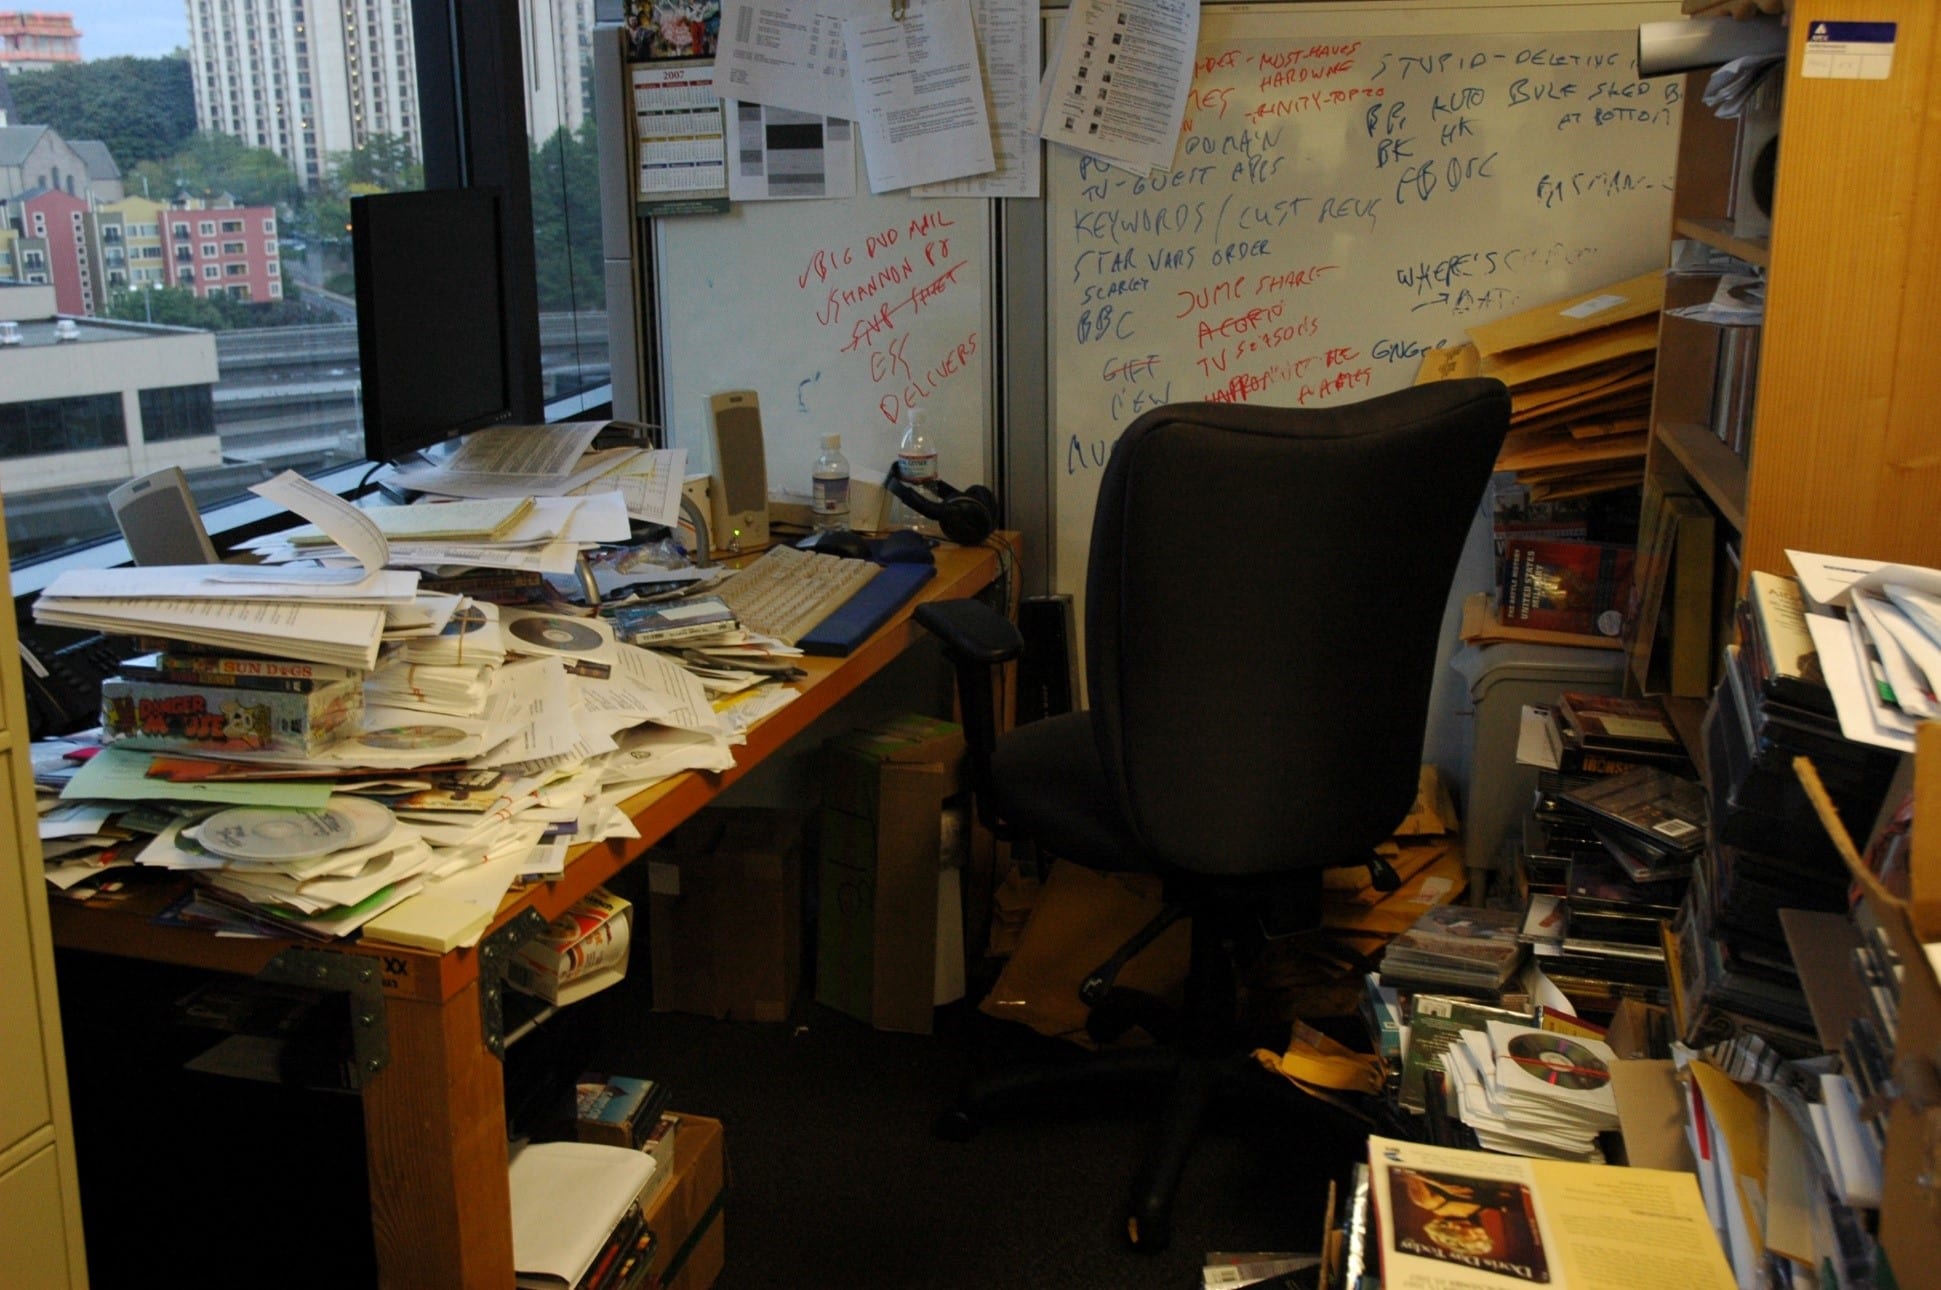 A cluttered office desk with piles of papers, books, and CDs, an empty chair, and shelves filled with more documents. The background includes a whiteboard with various notes that conform to a systematic plan, and large windows showing city buildings.